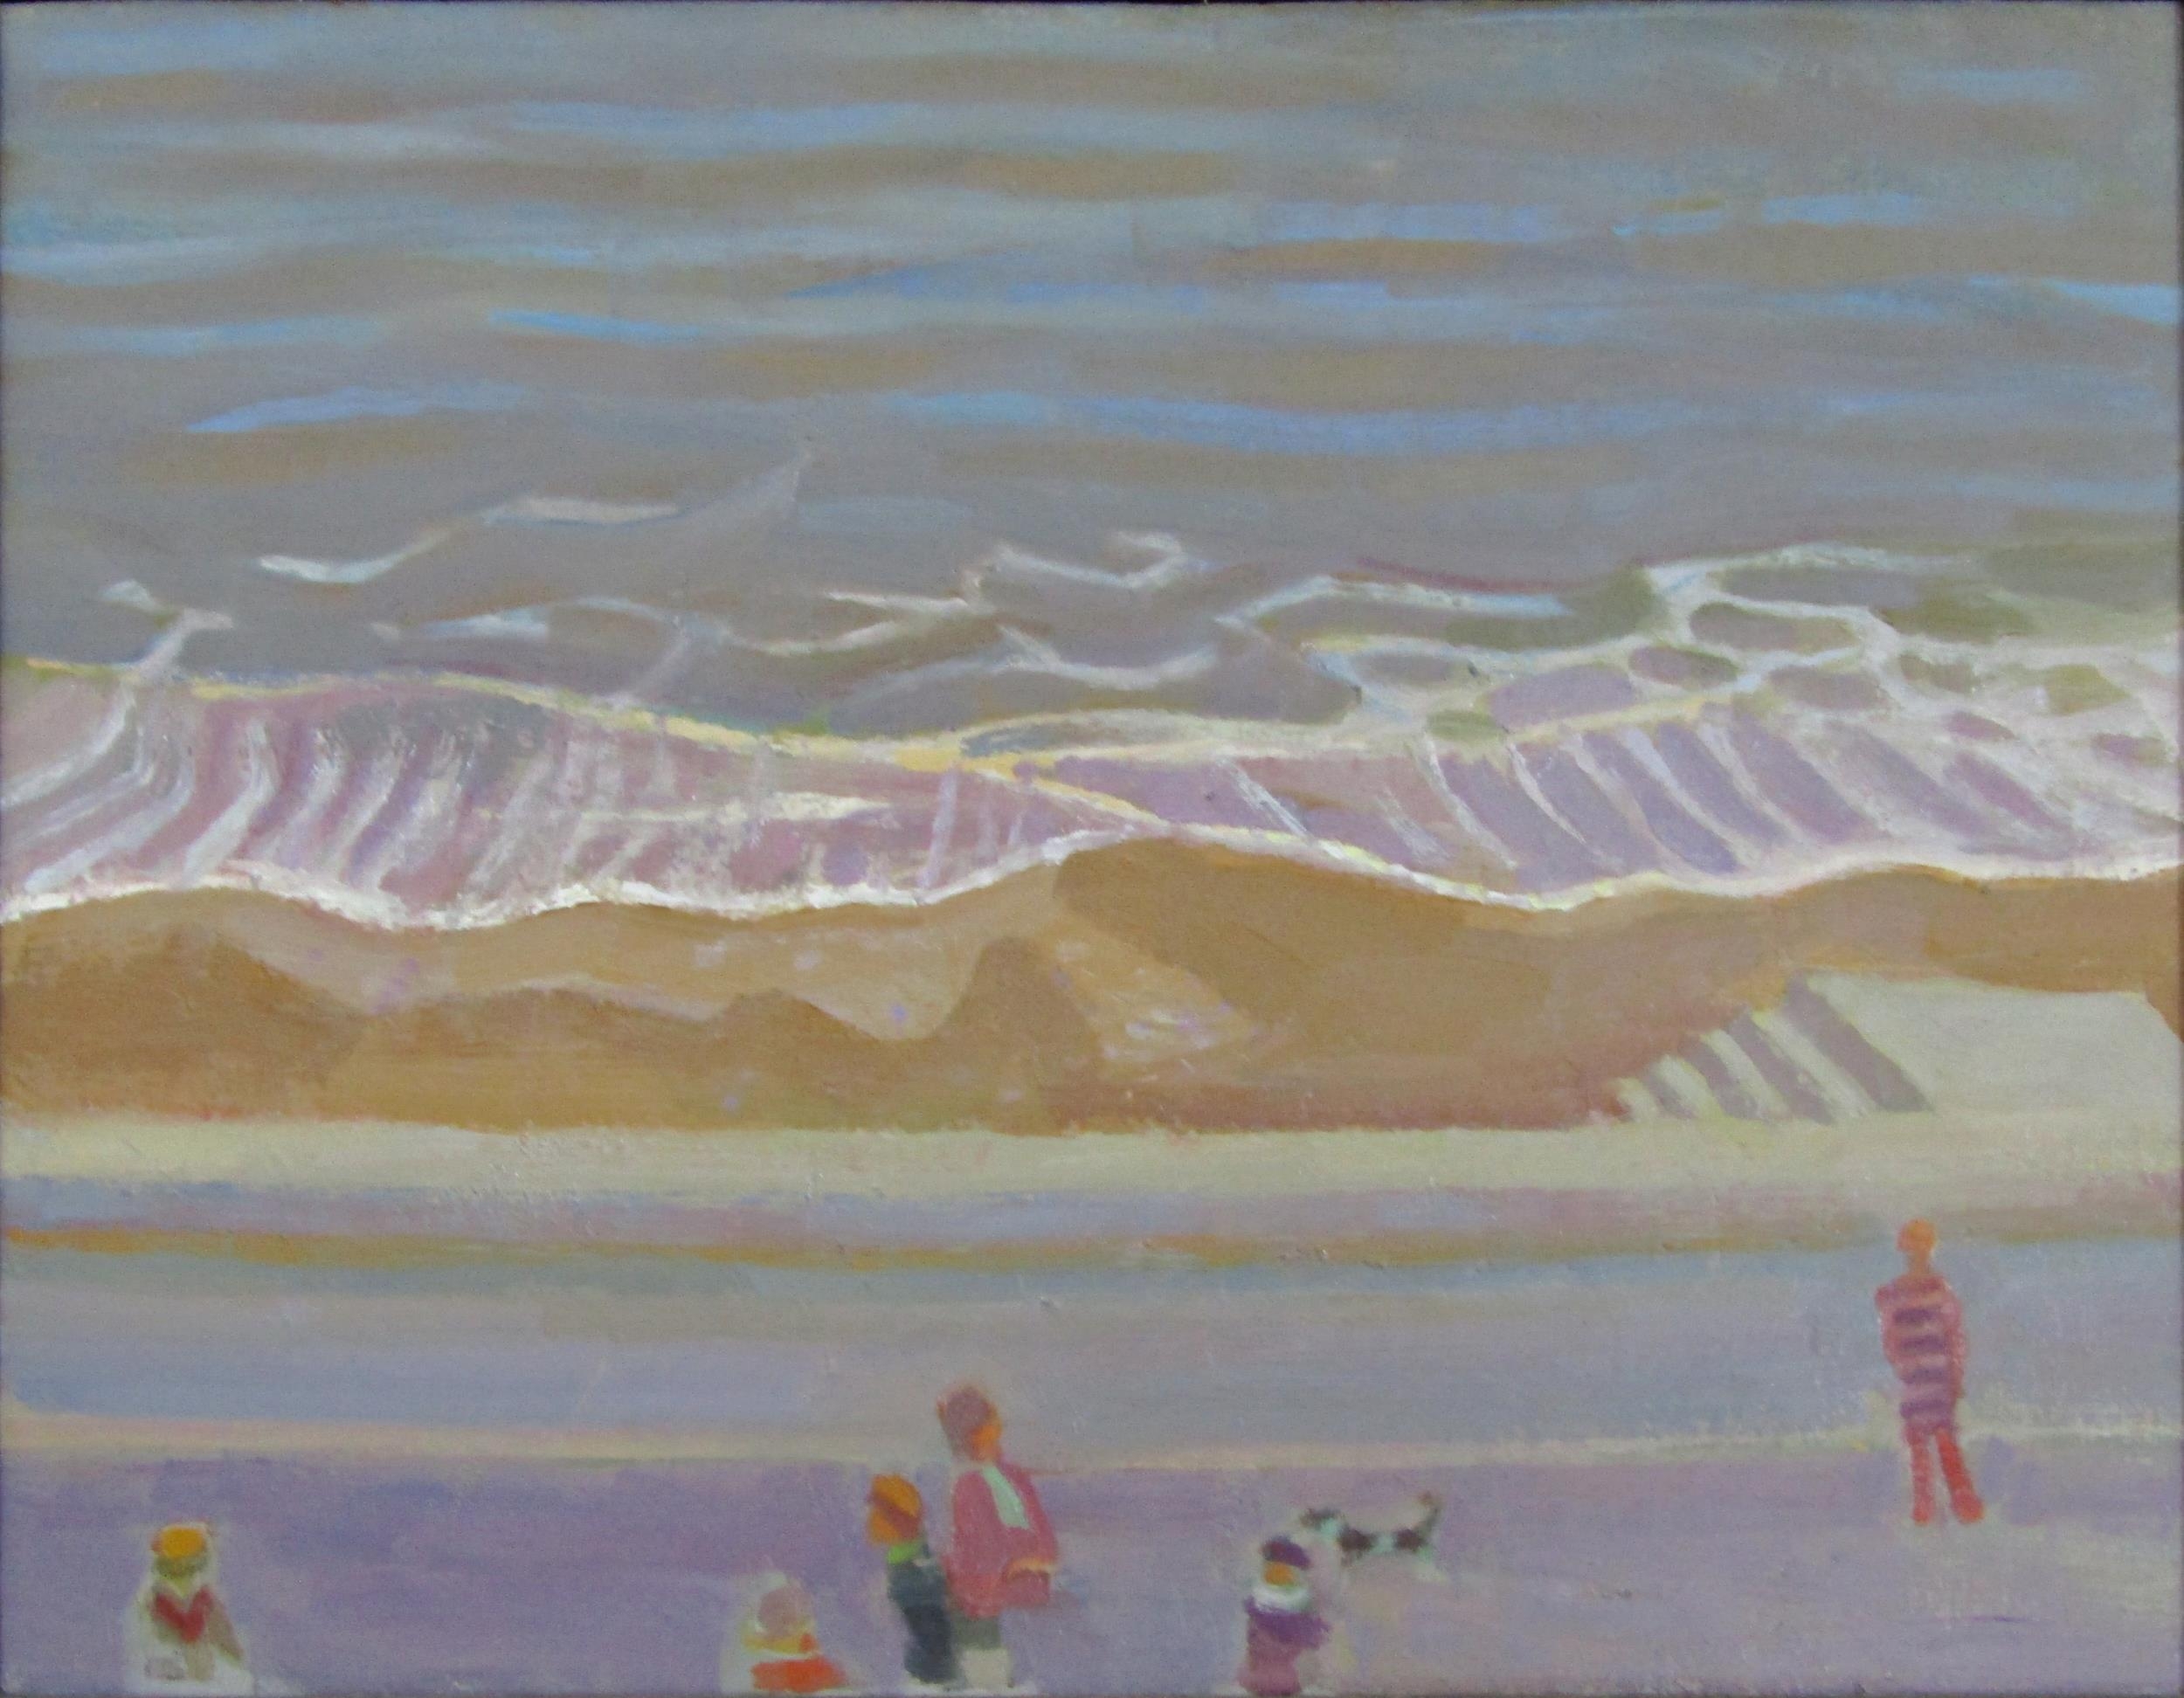 ROBERT ORGAN (b.1933) 'SEA EDGE' oil on board, signed and dated 94-95 to verso 30cm x 40cm